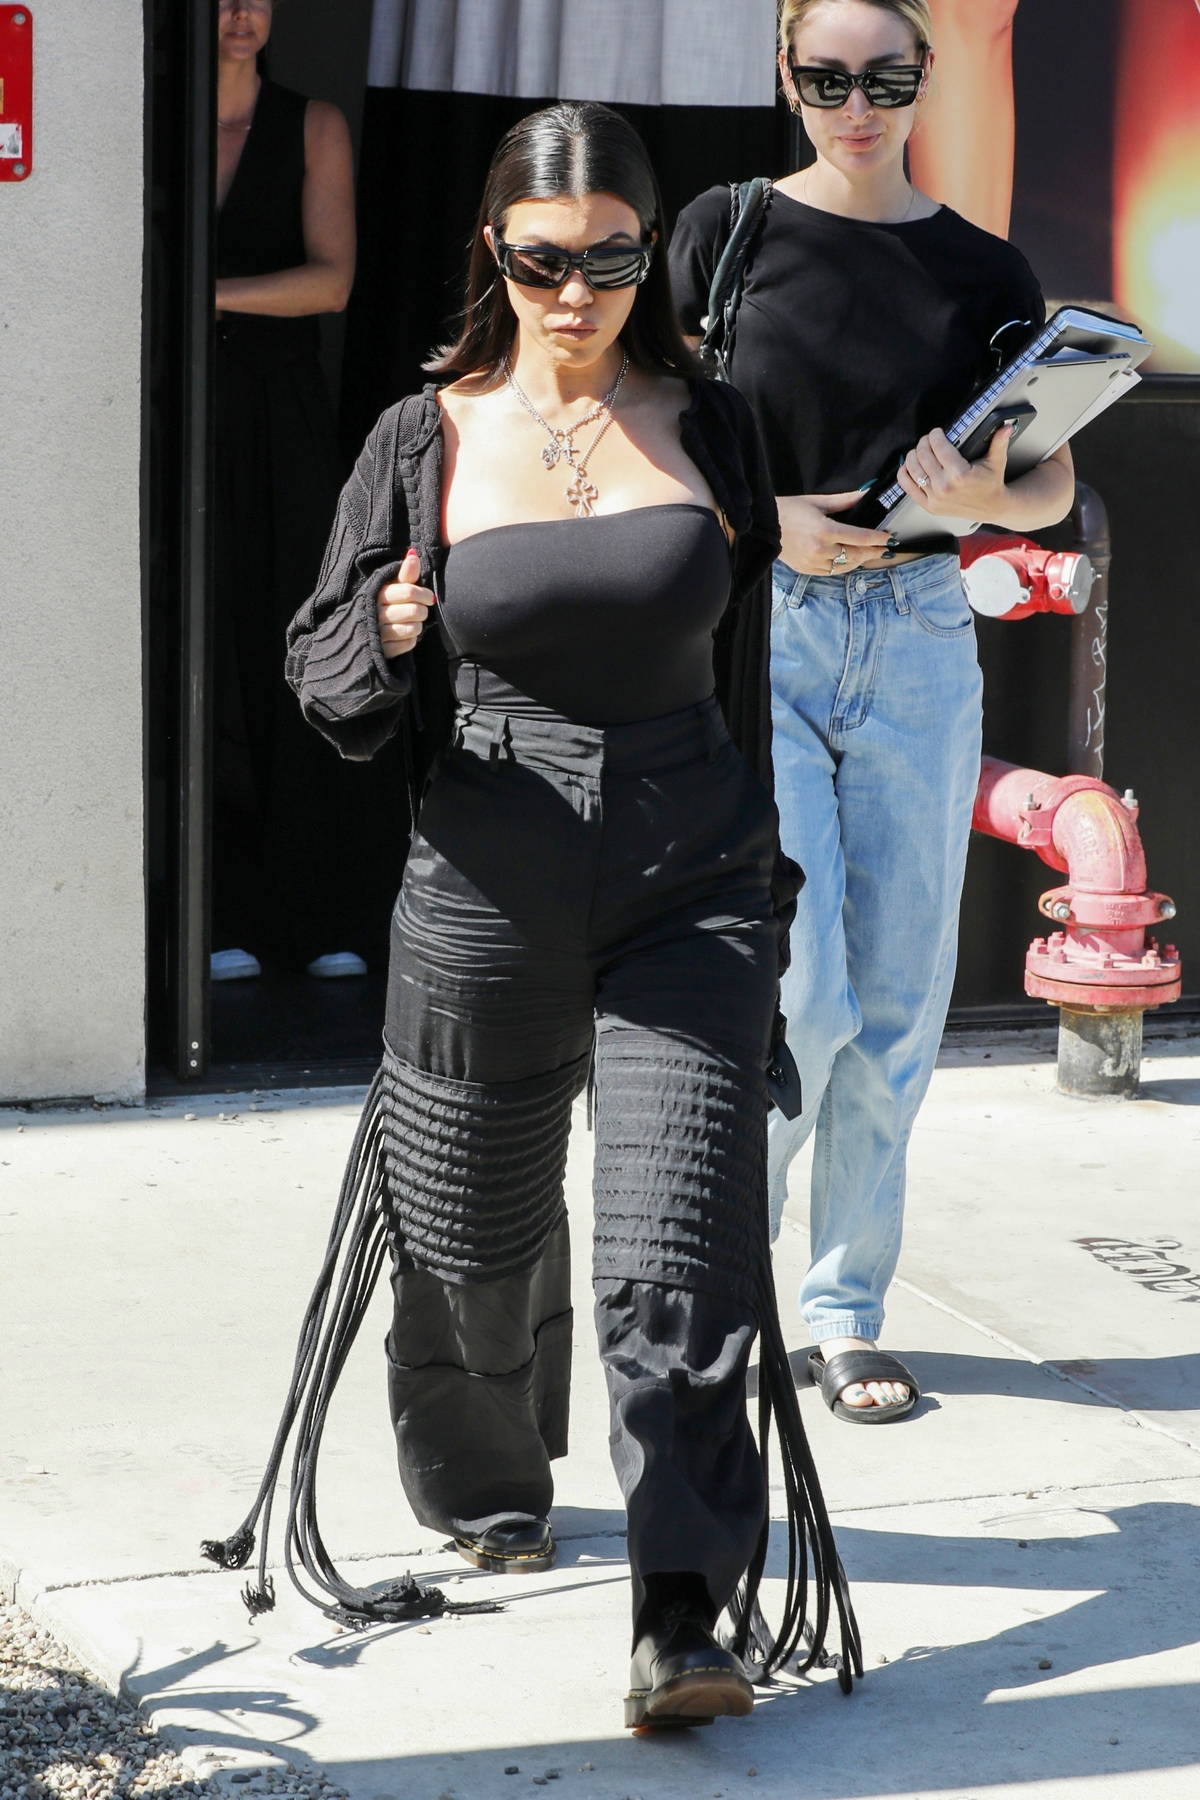 Kourtney Kardashian dons all-black as she leaves after a photoshoot at the  BooHoo store in